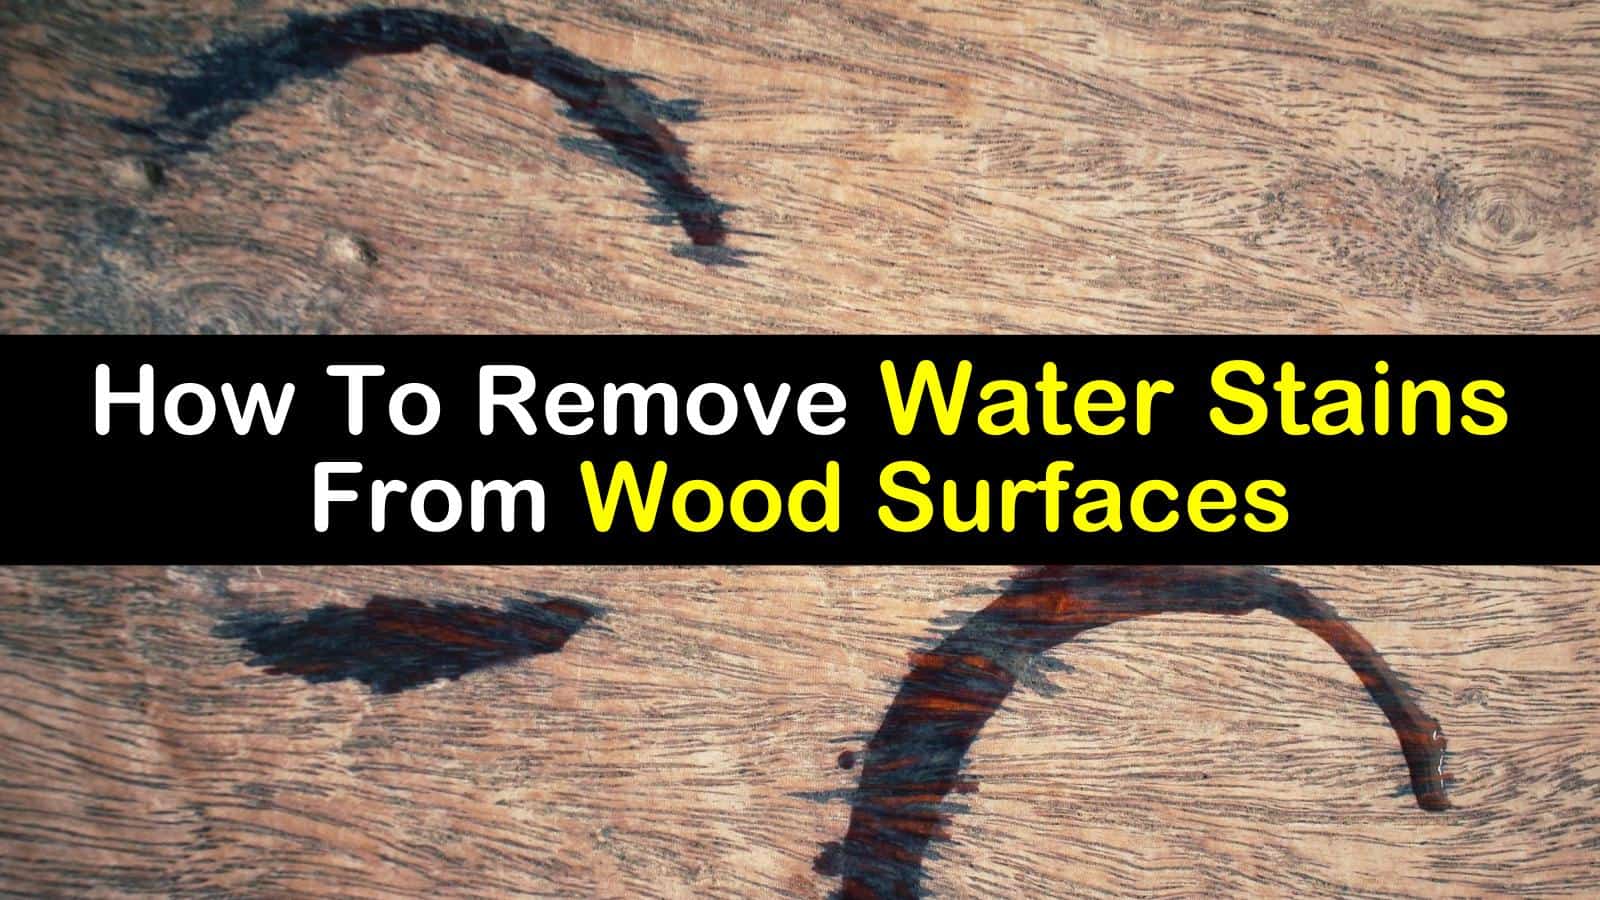 Remove Water Stains From Wood, How To Remove Black Water Stains From Hardwood Floors